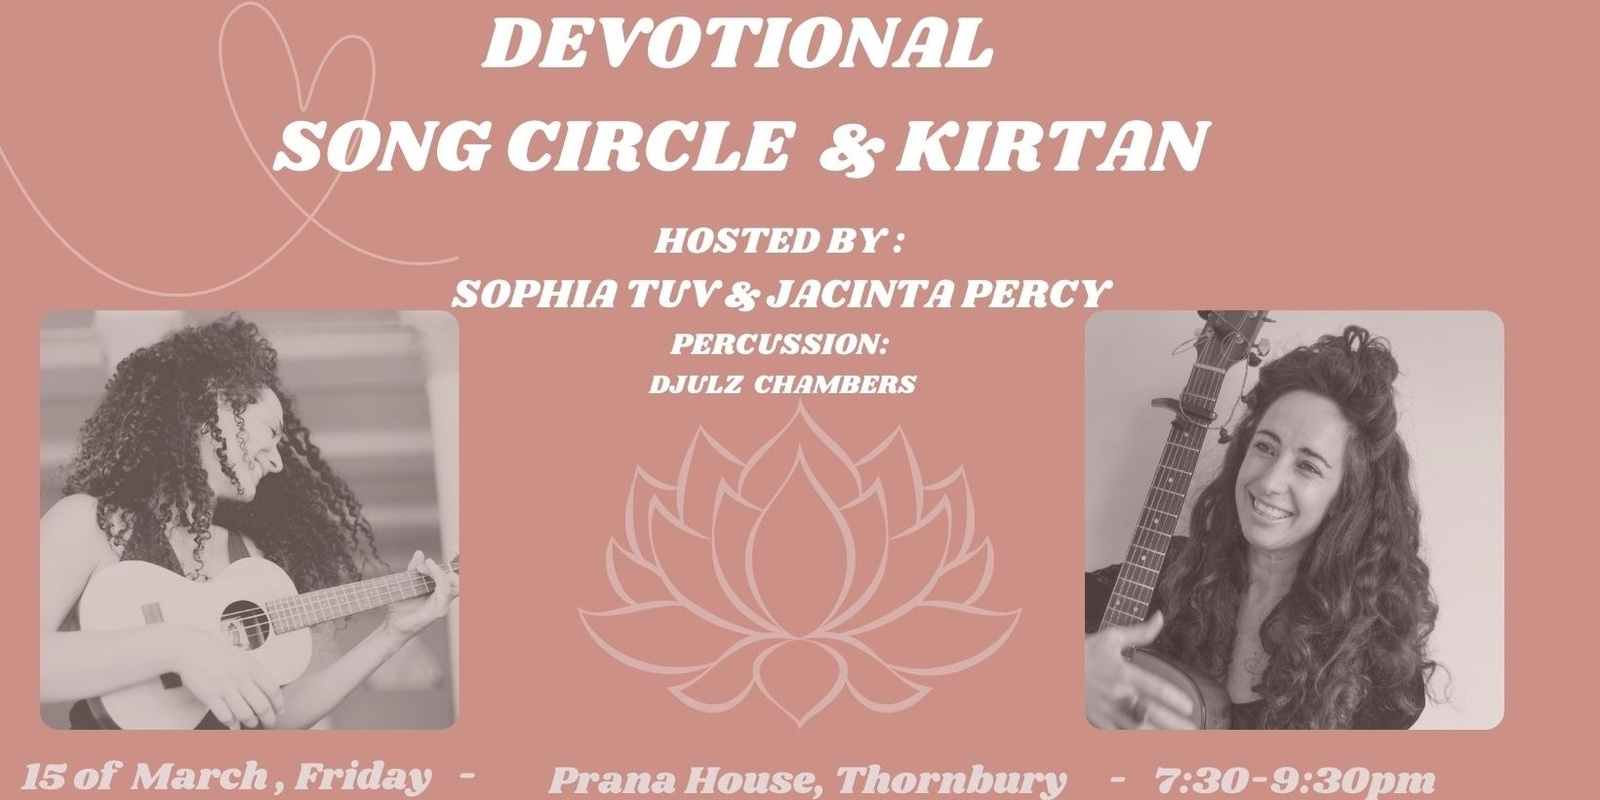 Banner image for Devotional Song Circle -with Jacinta Percy & Sophia Tuv  - with Djulz Chambers on Percussion